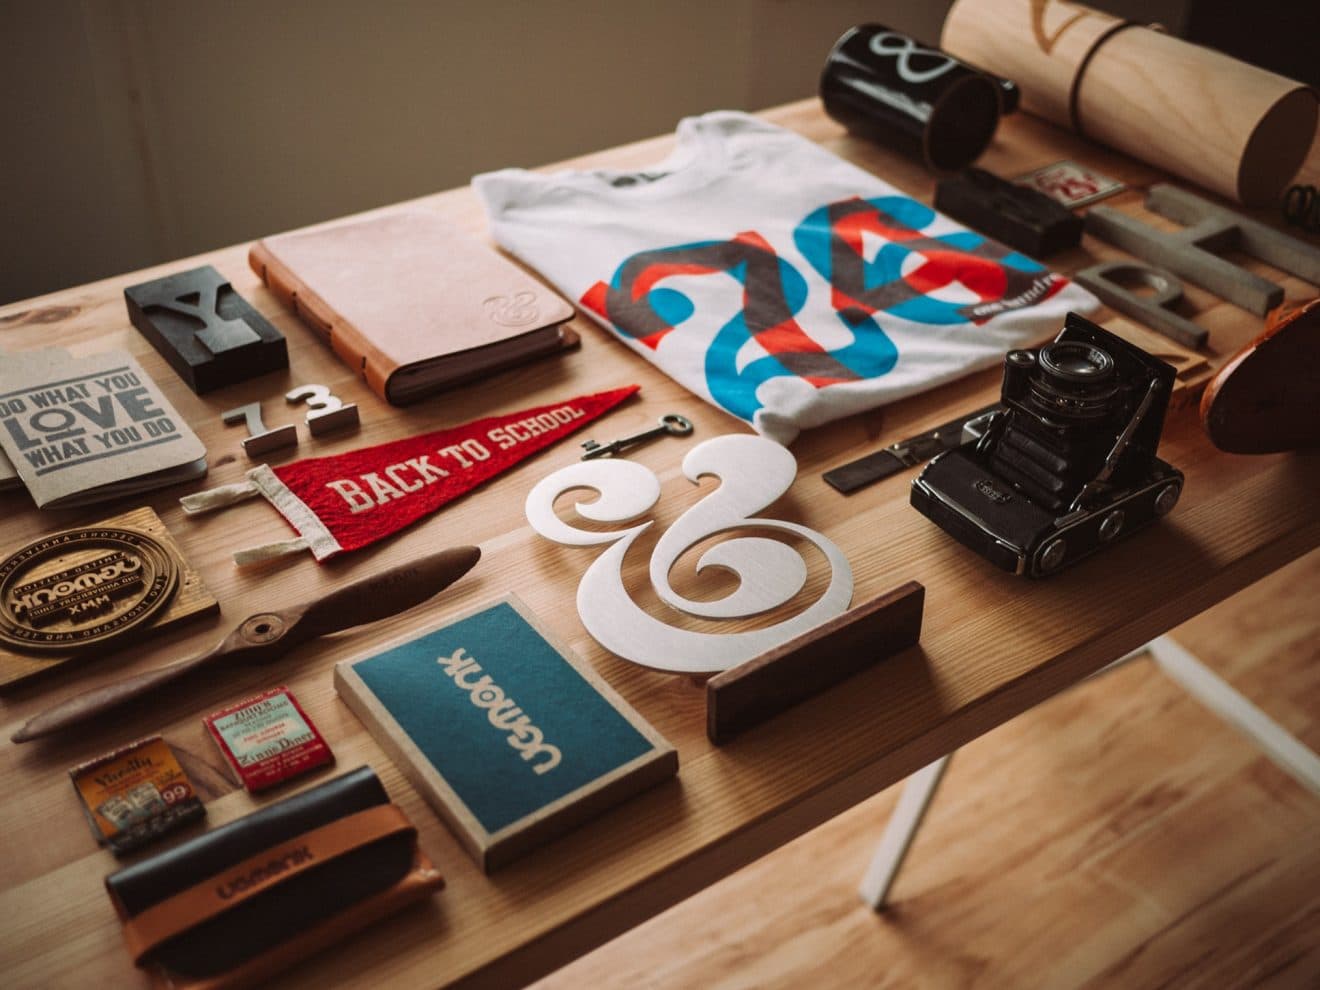 A photography companies assets laid on a table including a banner, an antique camera, and more.